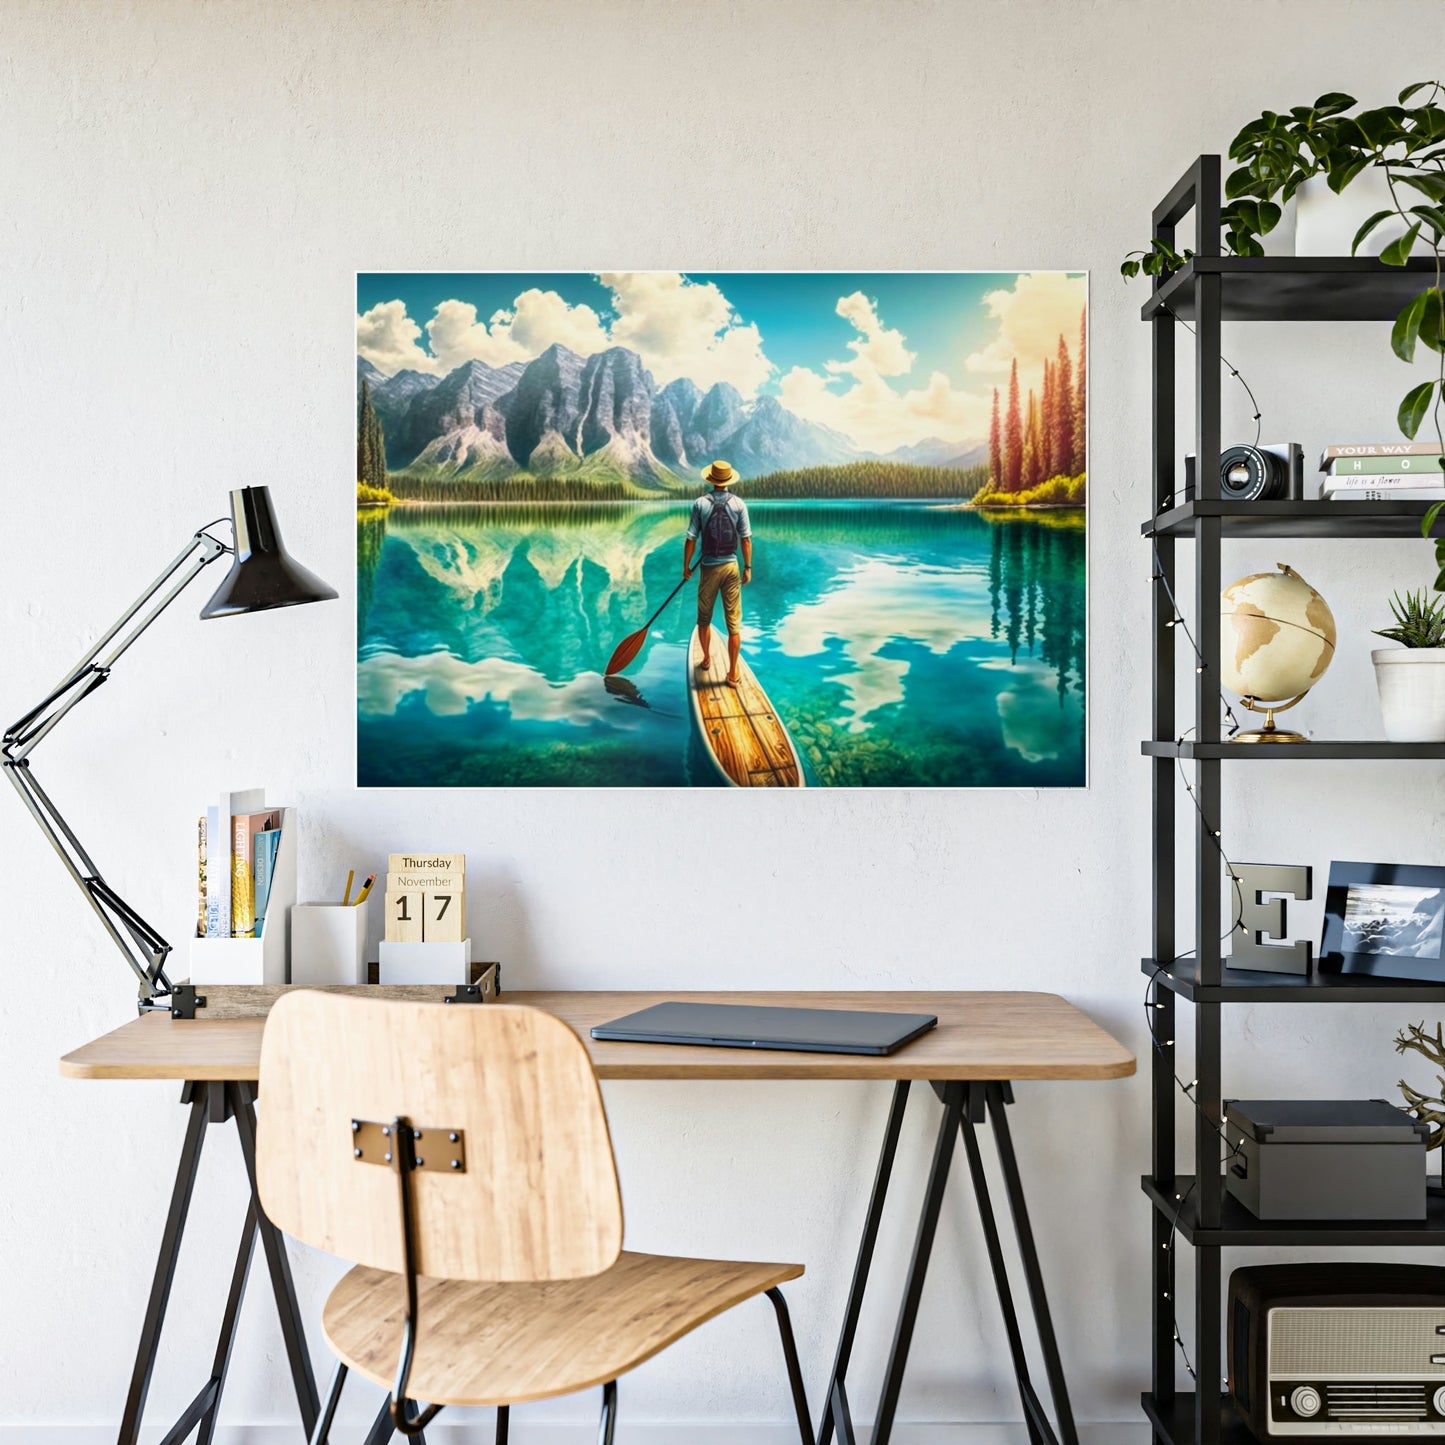 Scenic Riverscape: Wall Art of a Stunning River Landscape on Canvas